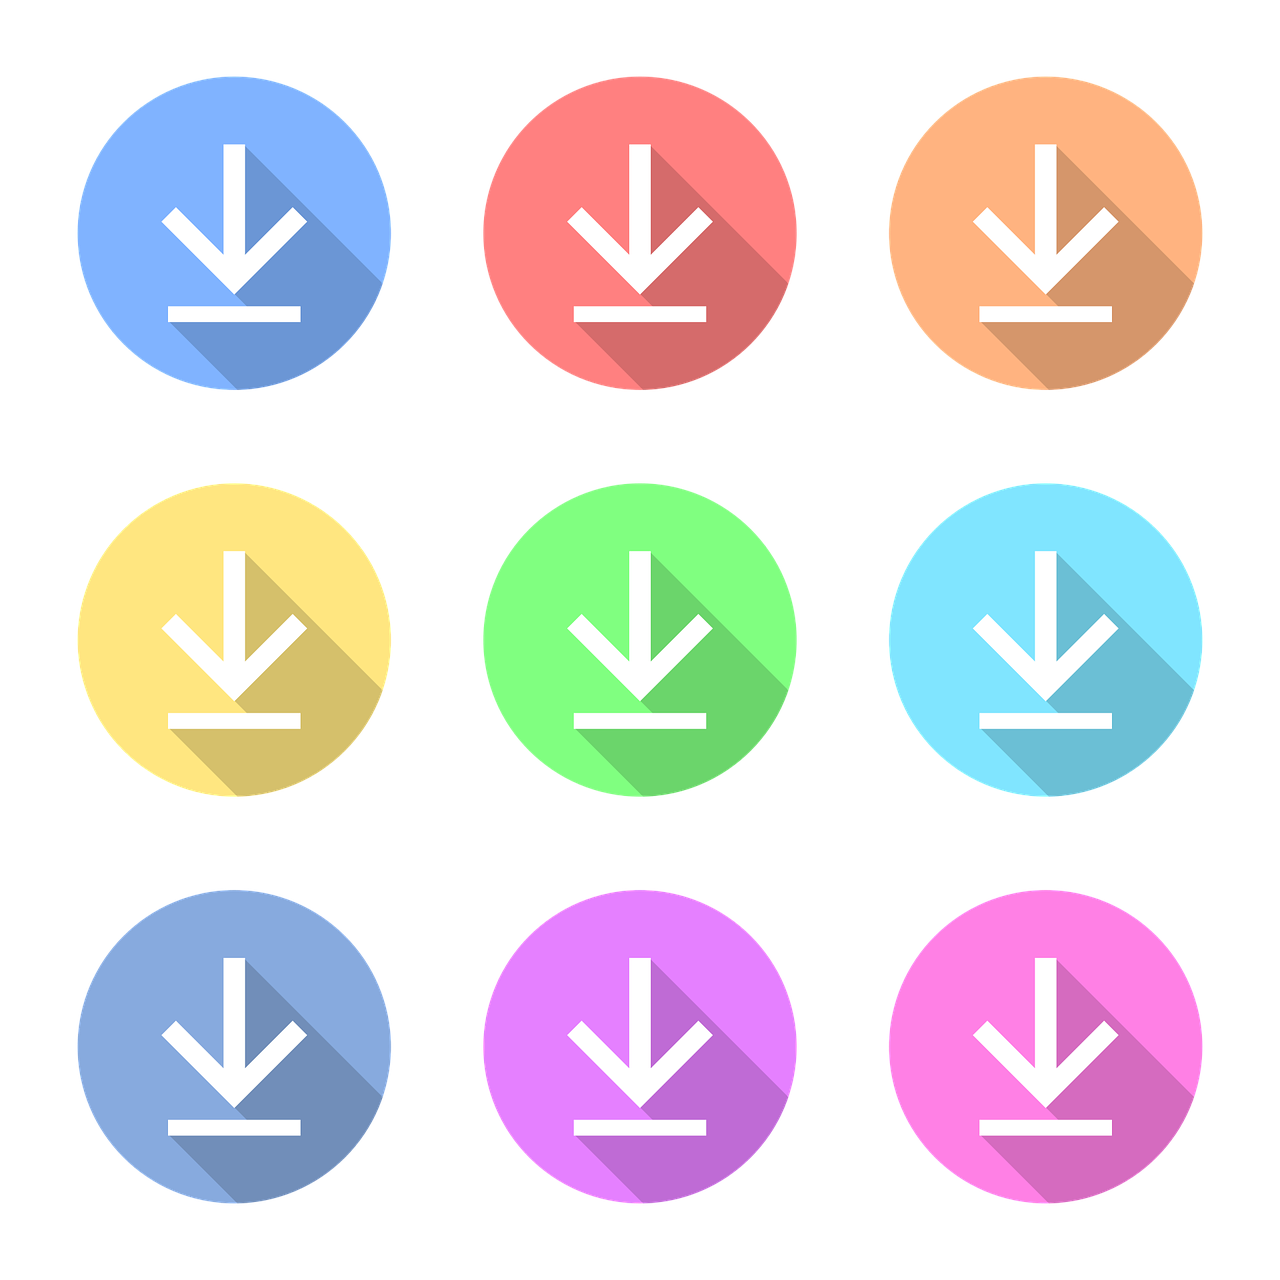 a bunch of different colored arrows on a black background, vector art, computer art, flat icon, upsidedown, soft round features, flat colors